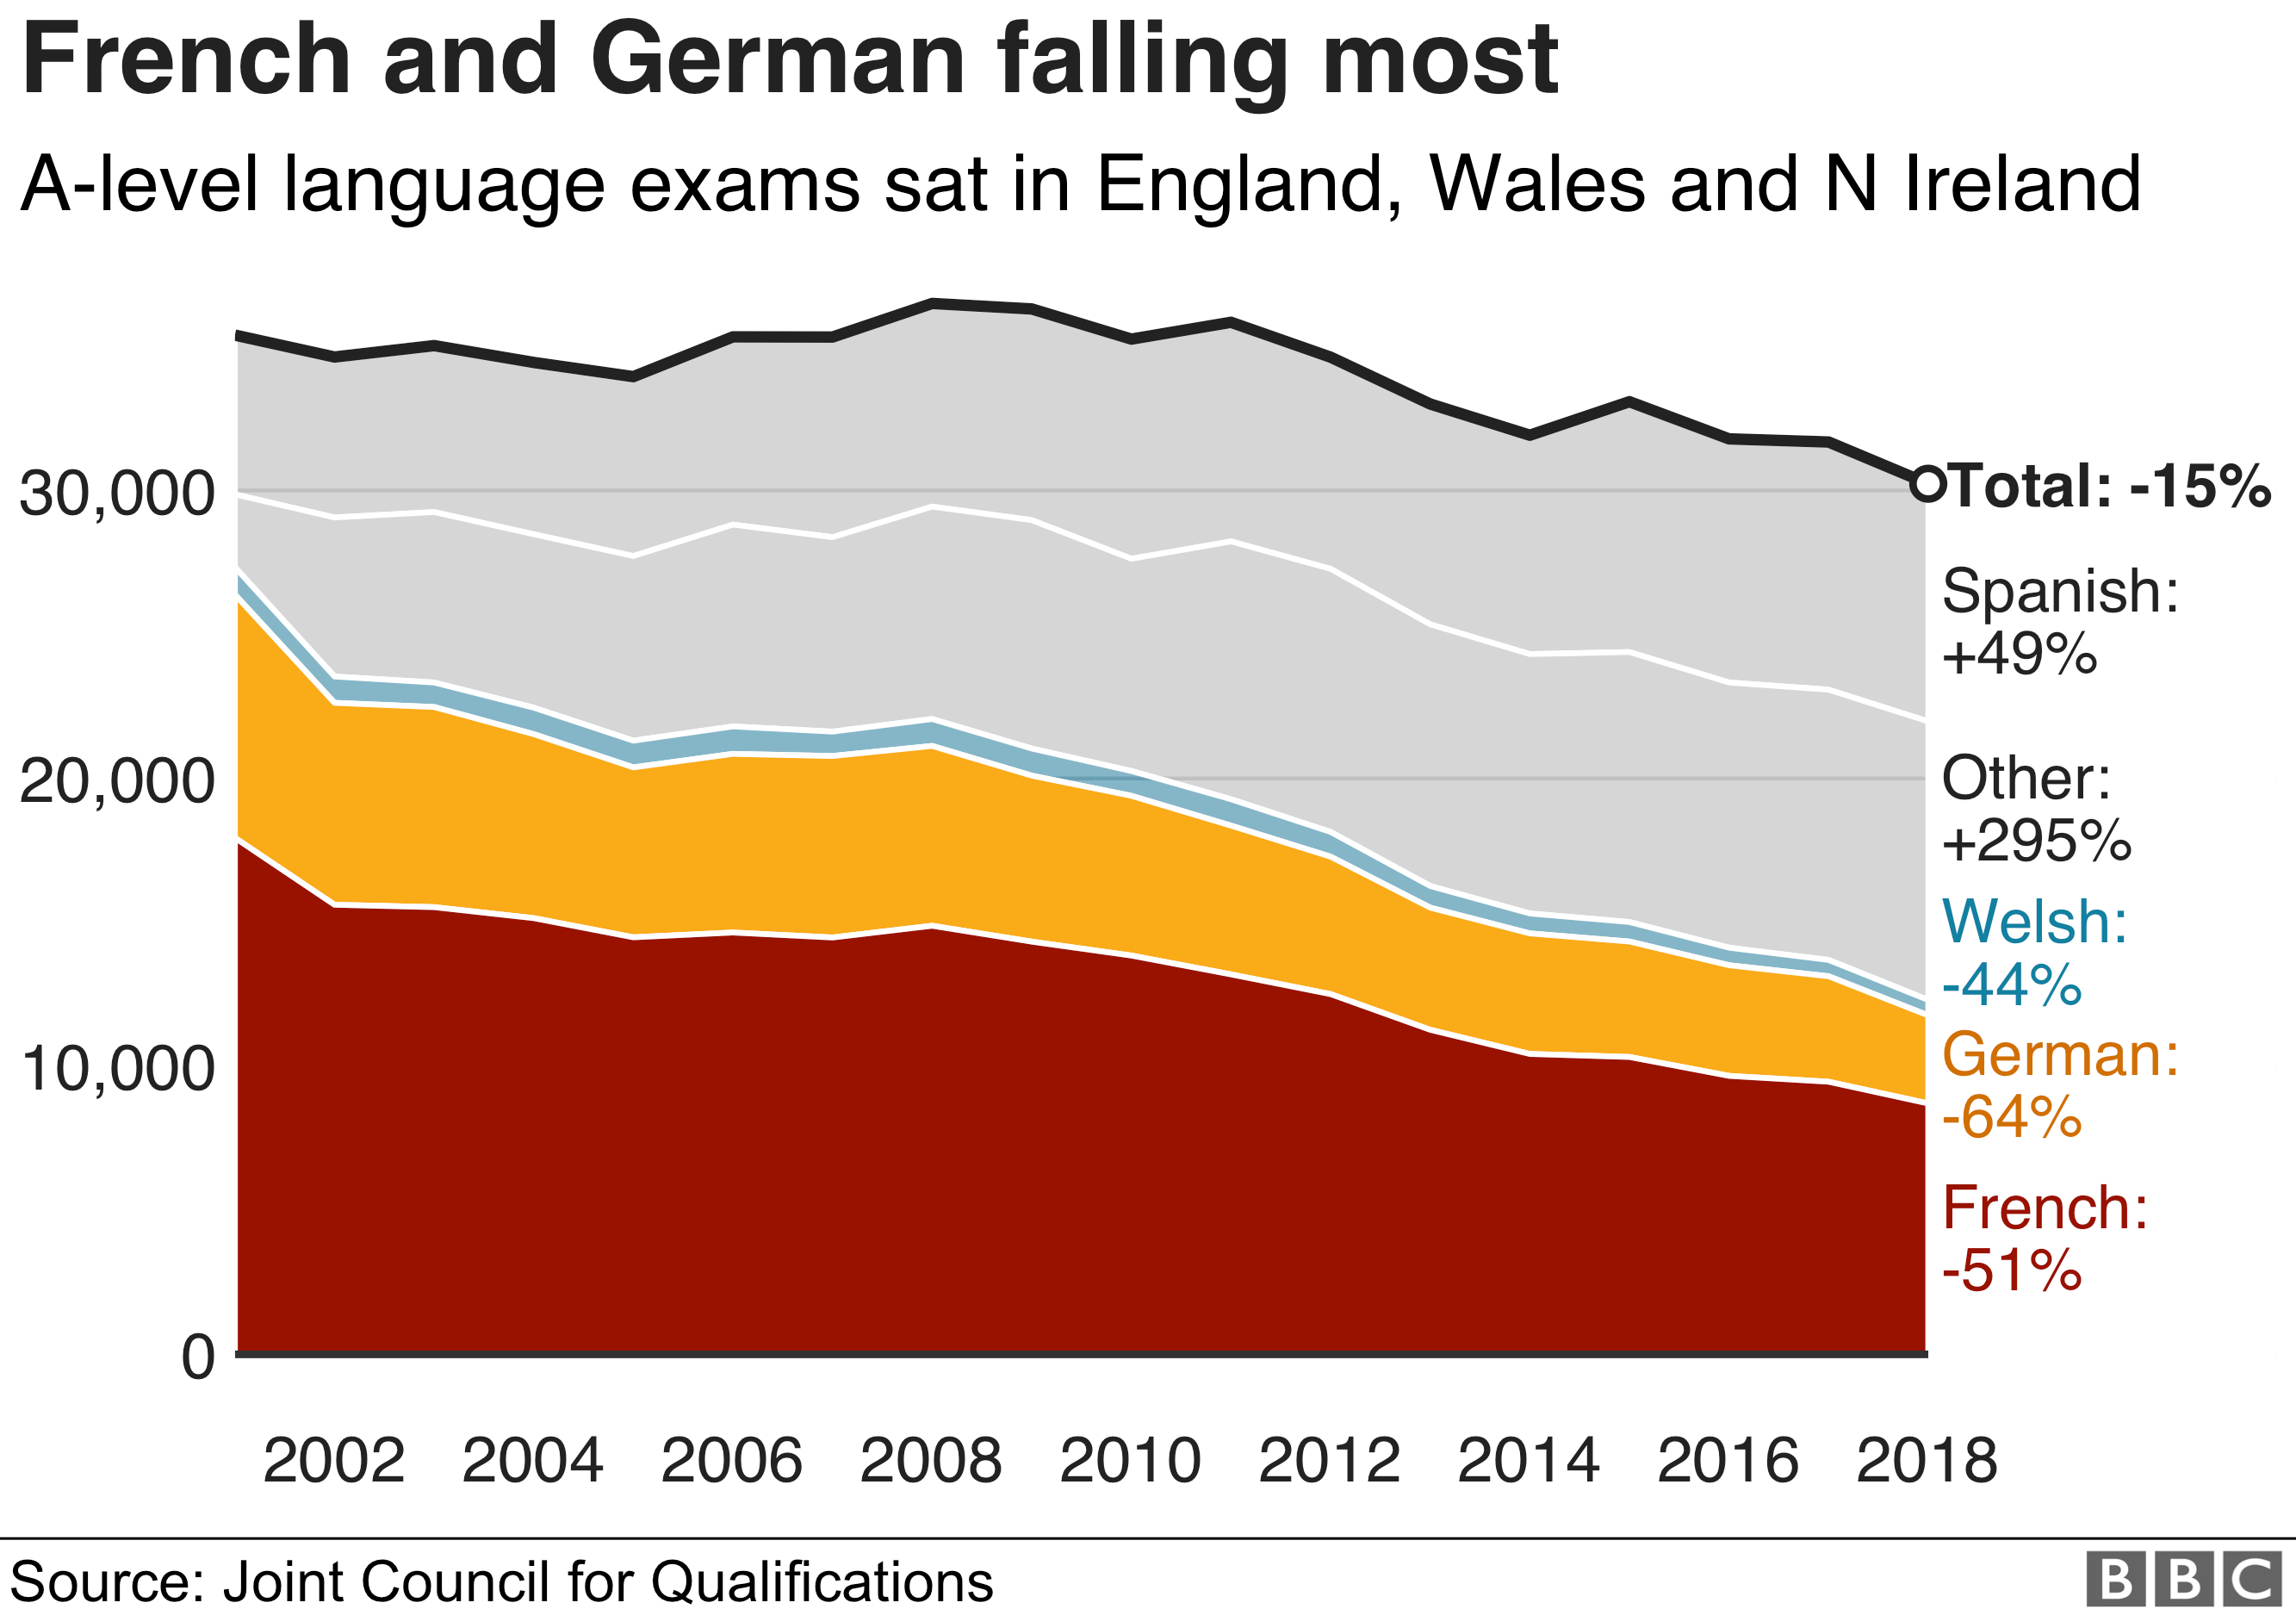 Chart showing that French and German are falling most in terms of A-levels sat in England, Wales and Northern Ireland